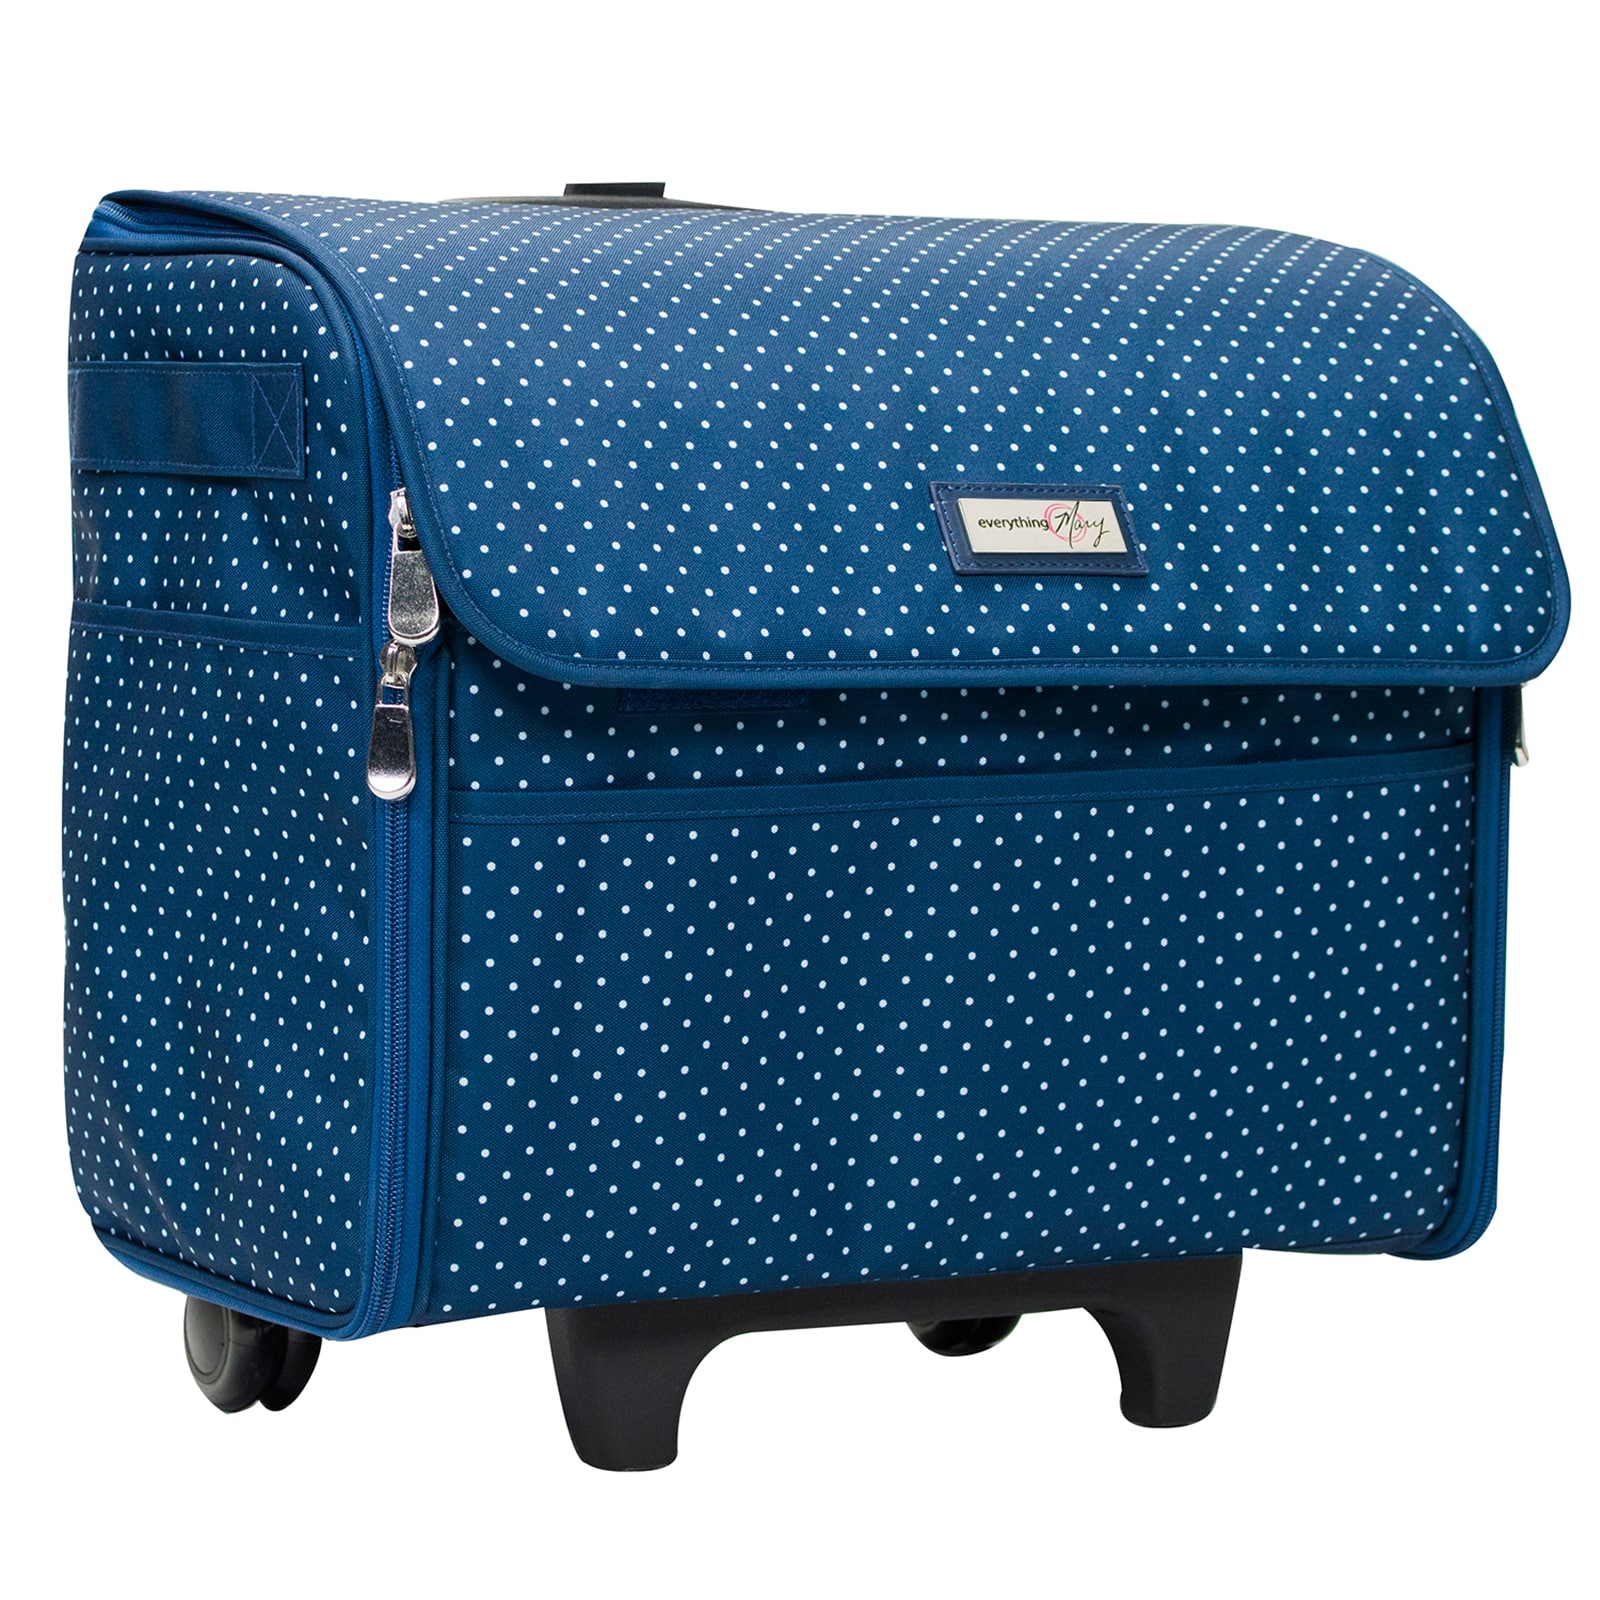 Everything Mary Collapsible Blue Pin Dot Rolling Sewing Machine Tote |  Michaels